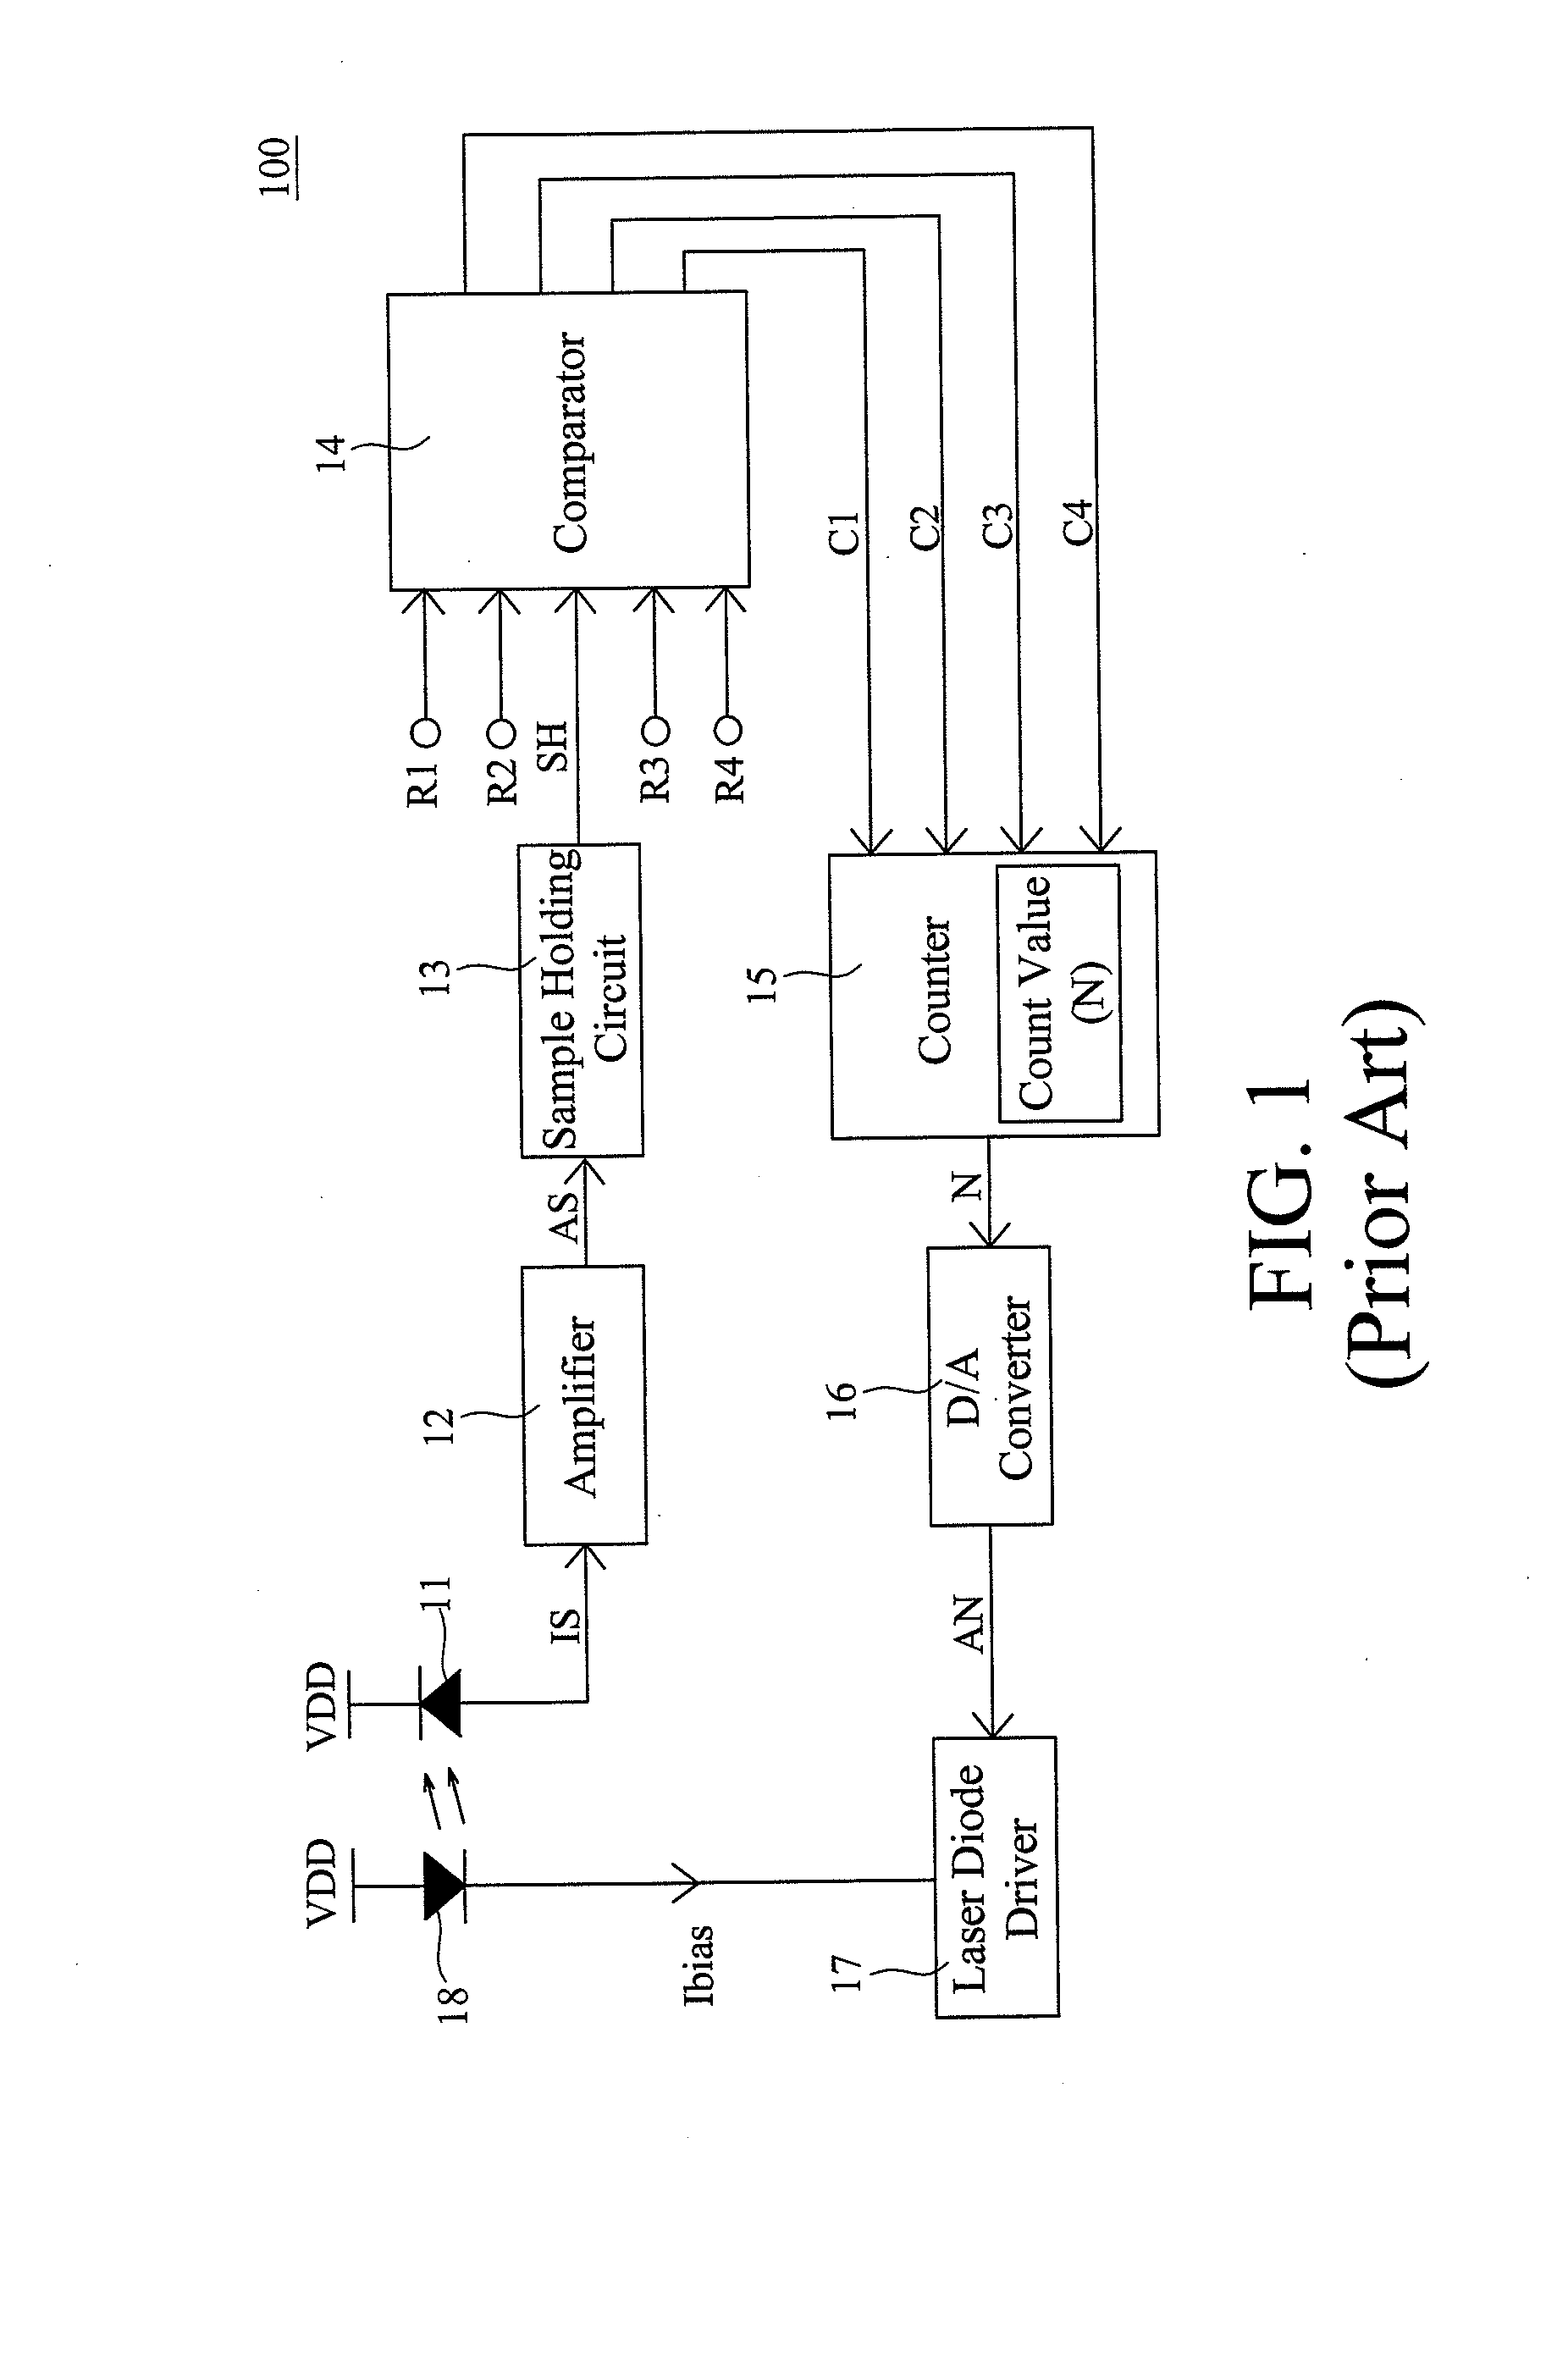 Automatic power control (APC) loop for adjusting the bias current of a laser diode